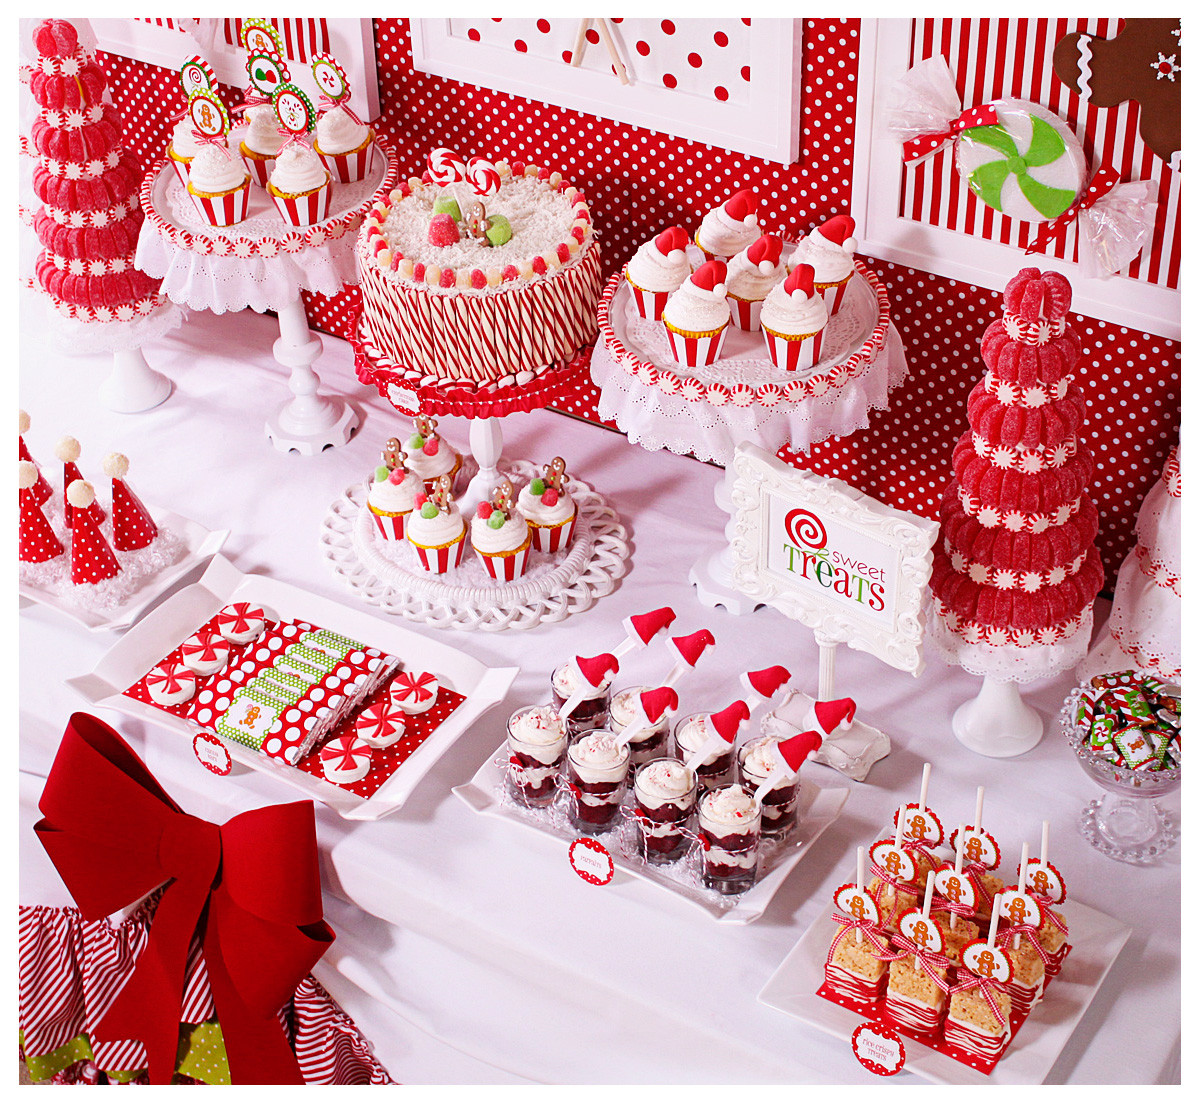 Christmas Candy Pictures
 Amanda s Parties To Go Candy Christmas Dessert Table